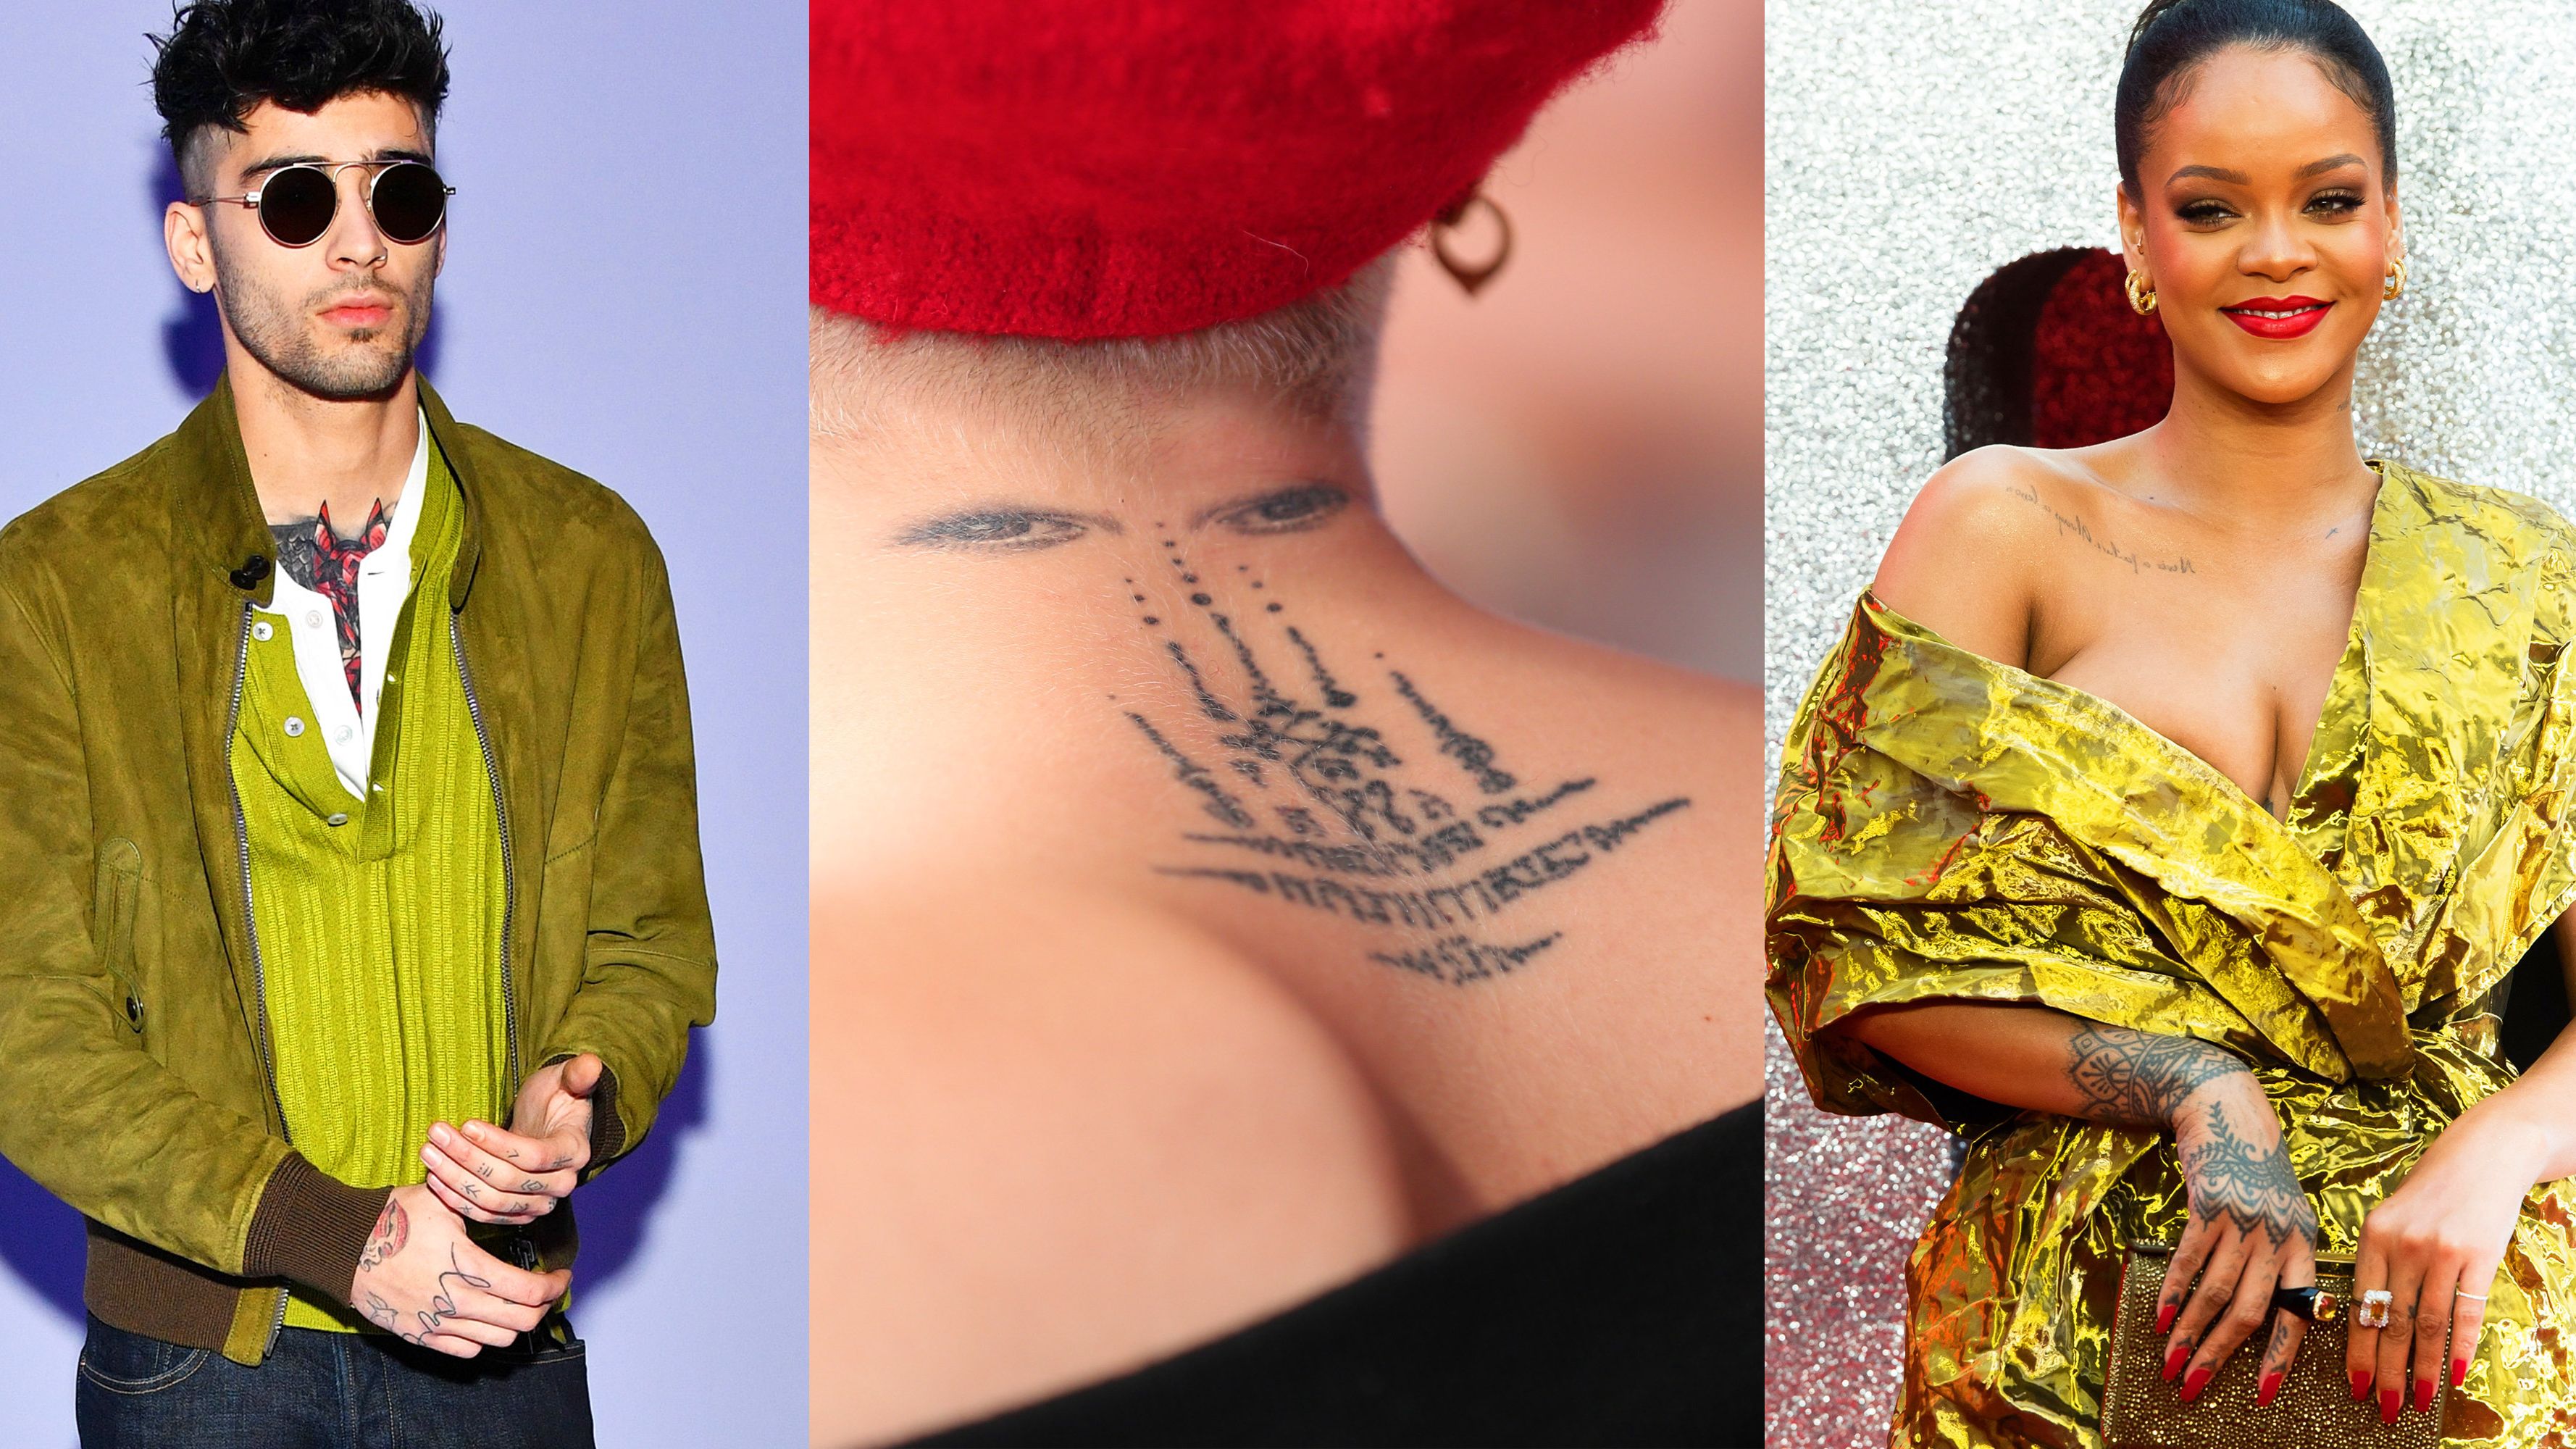 55 Celebrity Tattoo Meanings - New Celebrities' Tattoos 2020 | Marie Claire